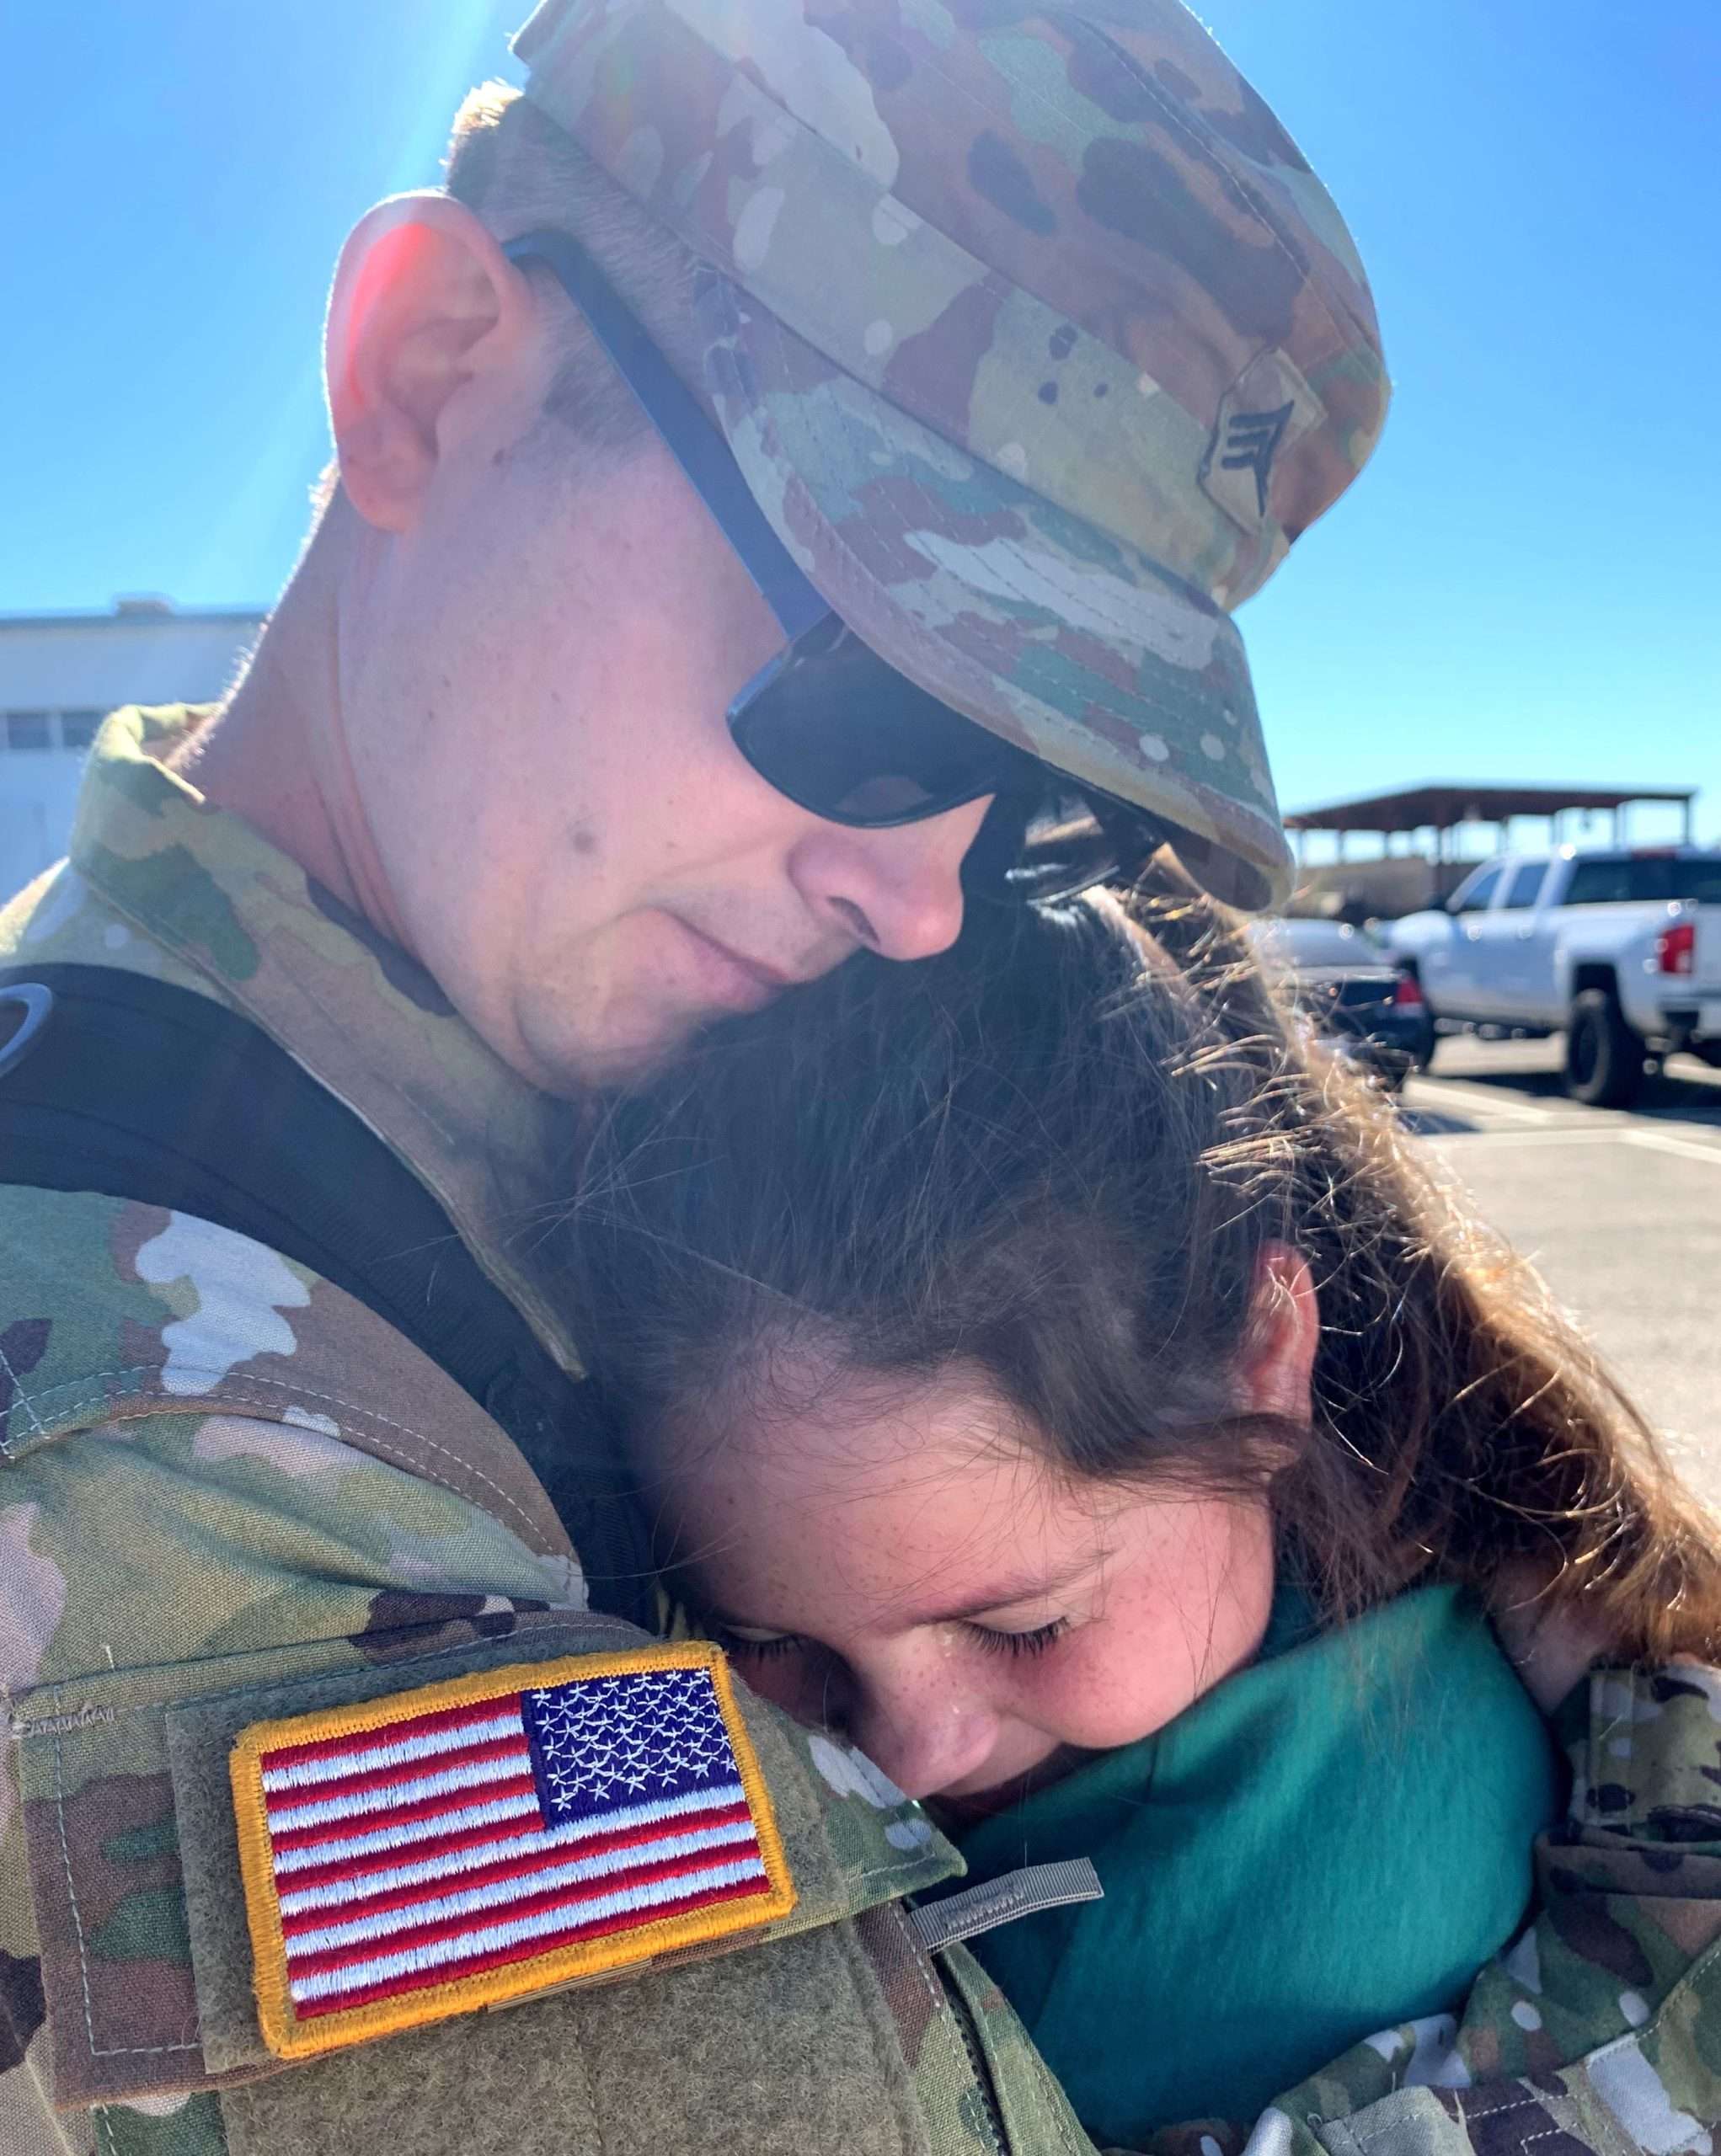 Soldier hugging his daughter before deployment | Finding Mandee